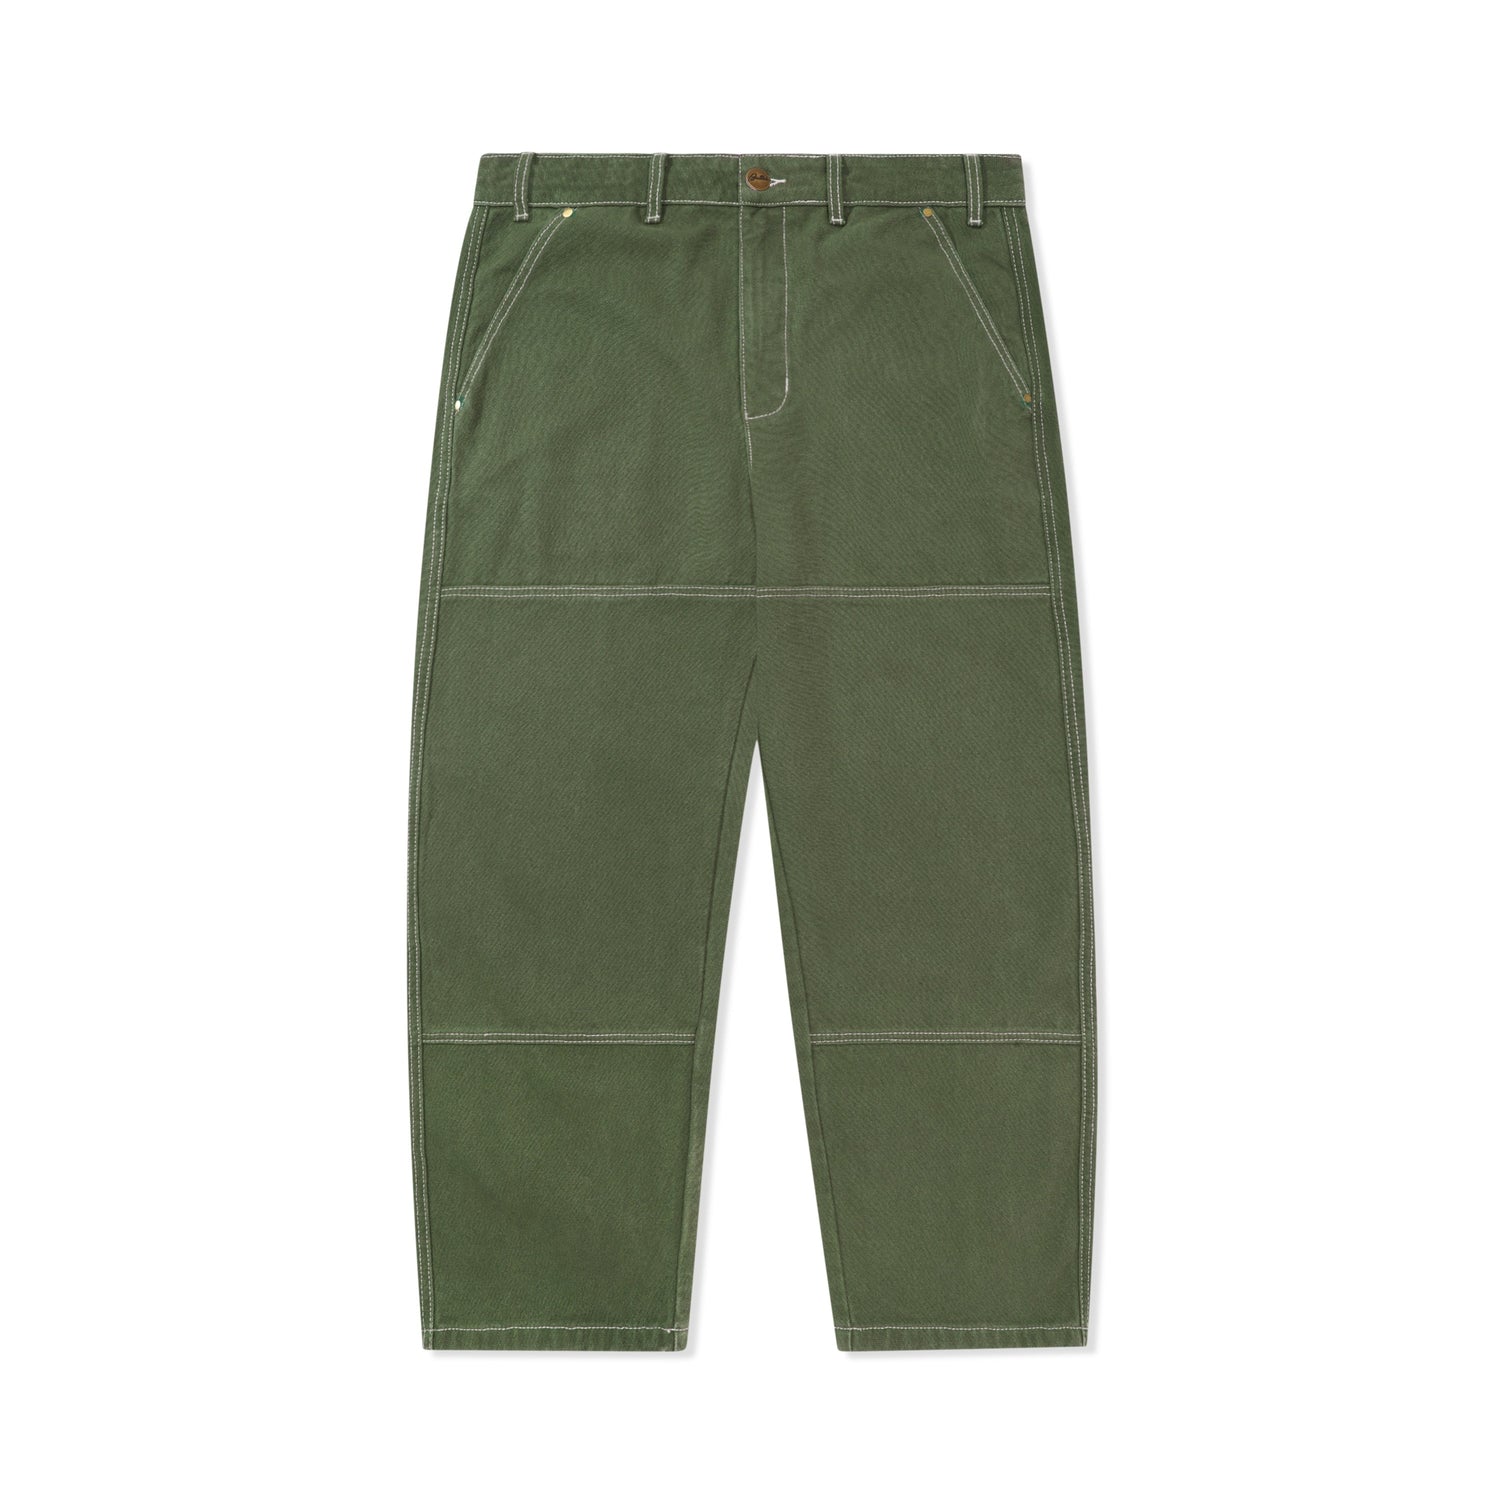 Work Double Knee Pants, Washed Army